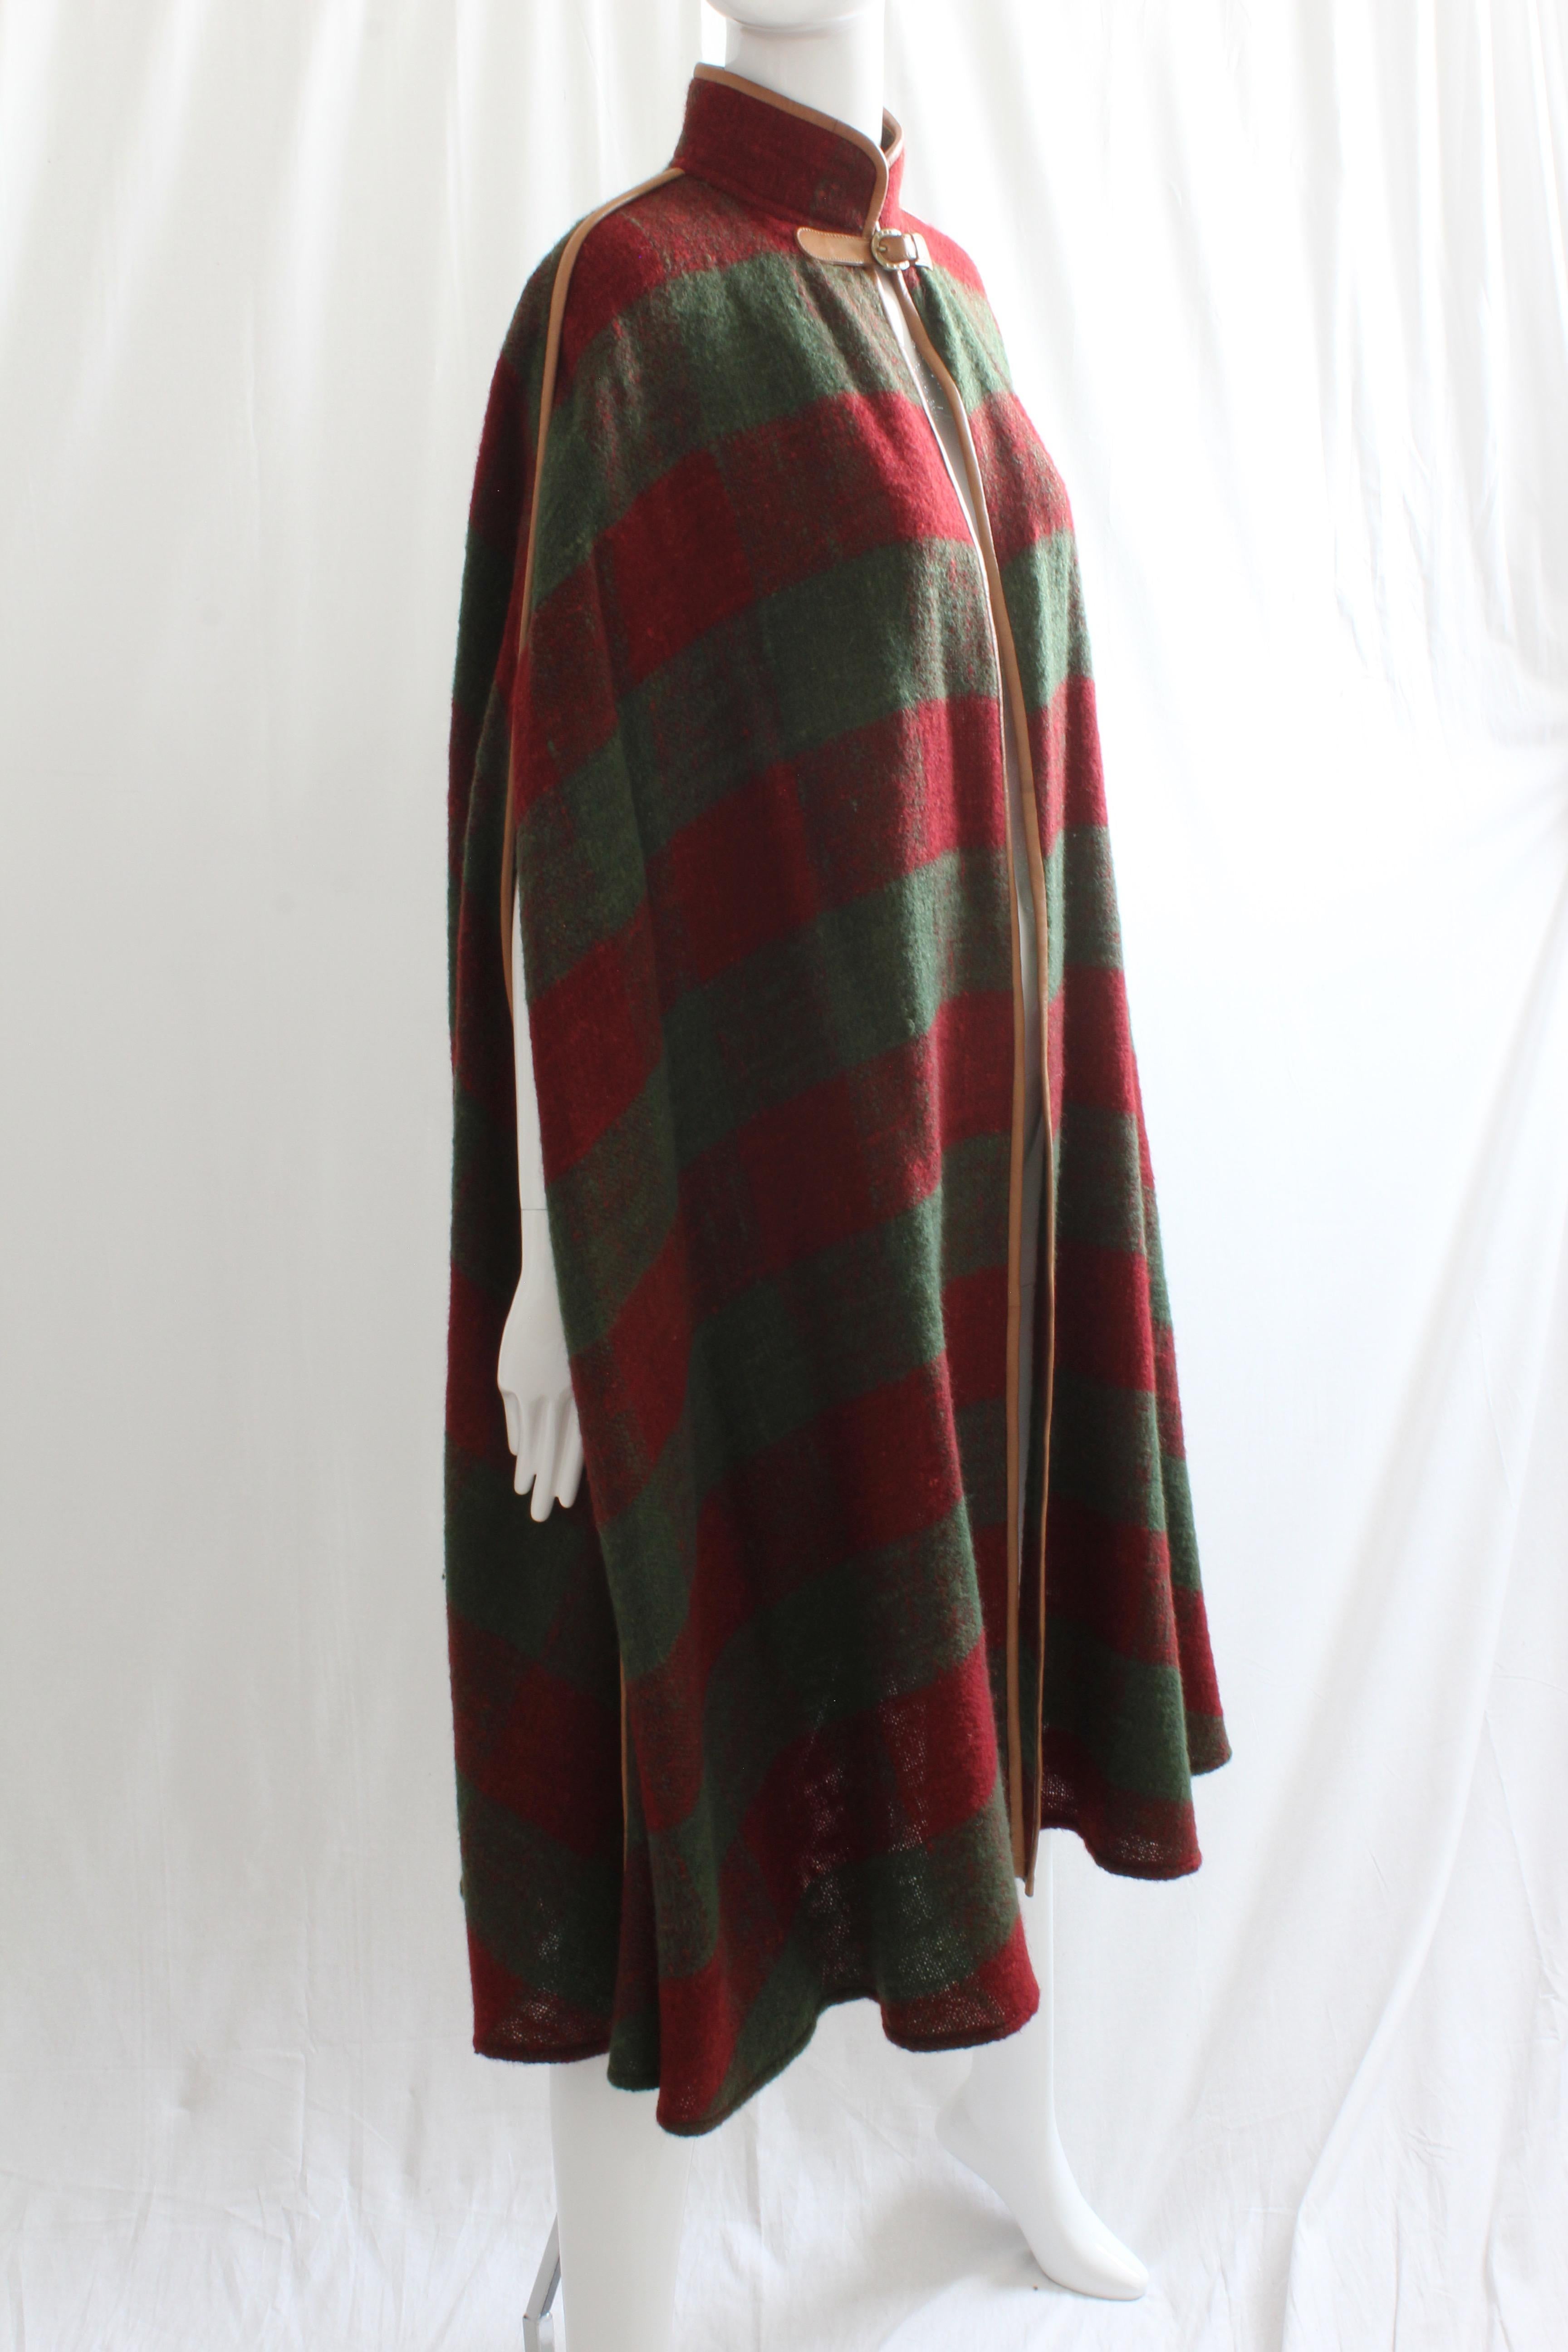 This long cape was made by Gucci, most likely in the late 70s or early 80s.  Made from supple lightweight wool in their signature web colors of green and red, it features saddle leather trim and a gold tone horse shoe buckle at the collar.  So hard